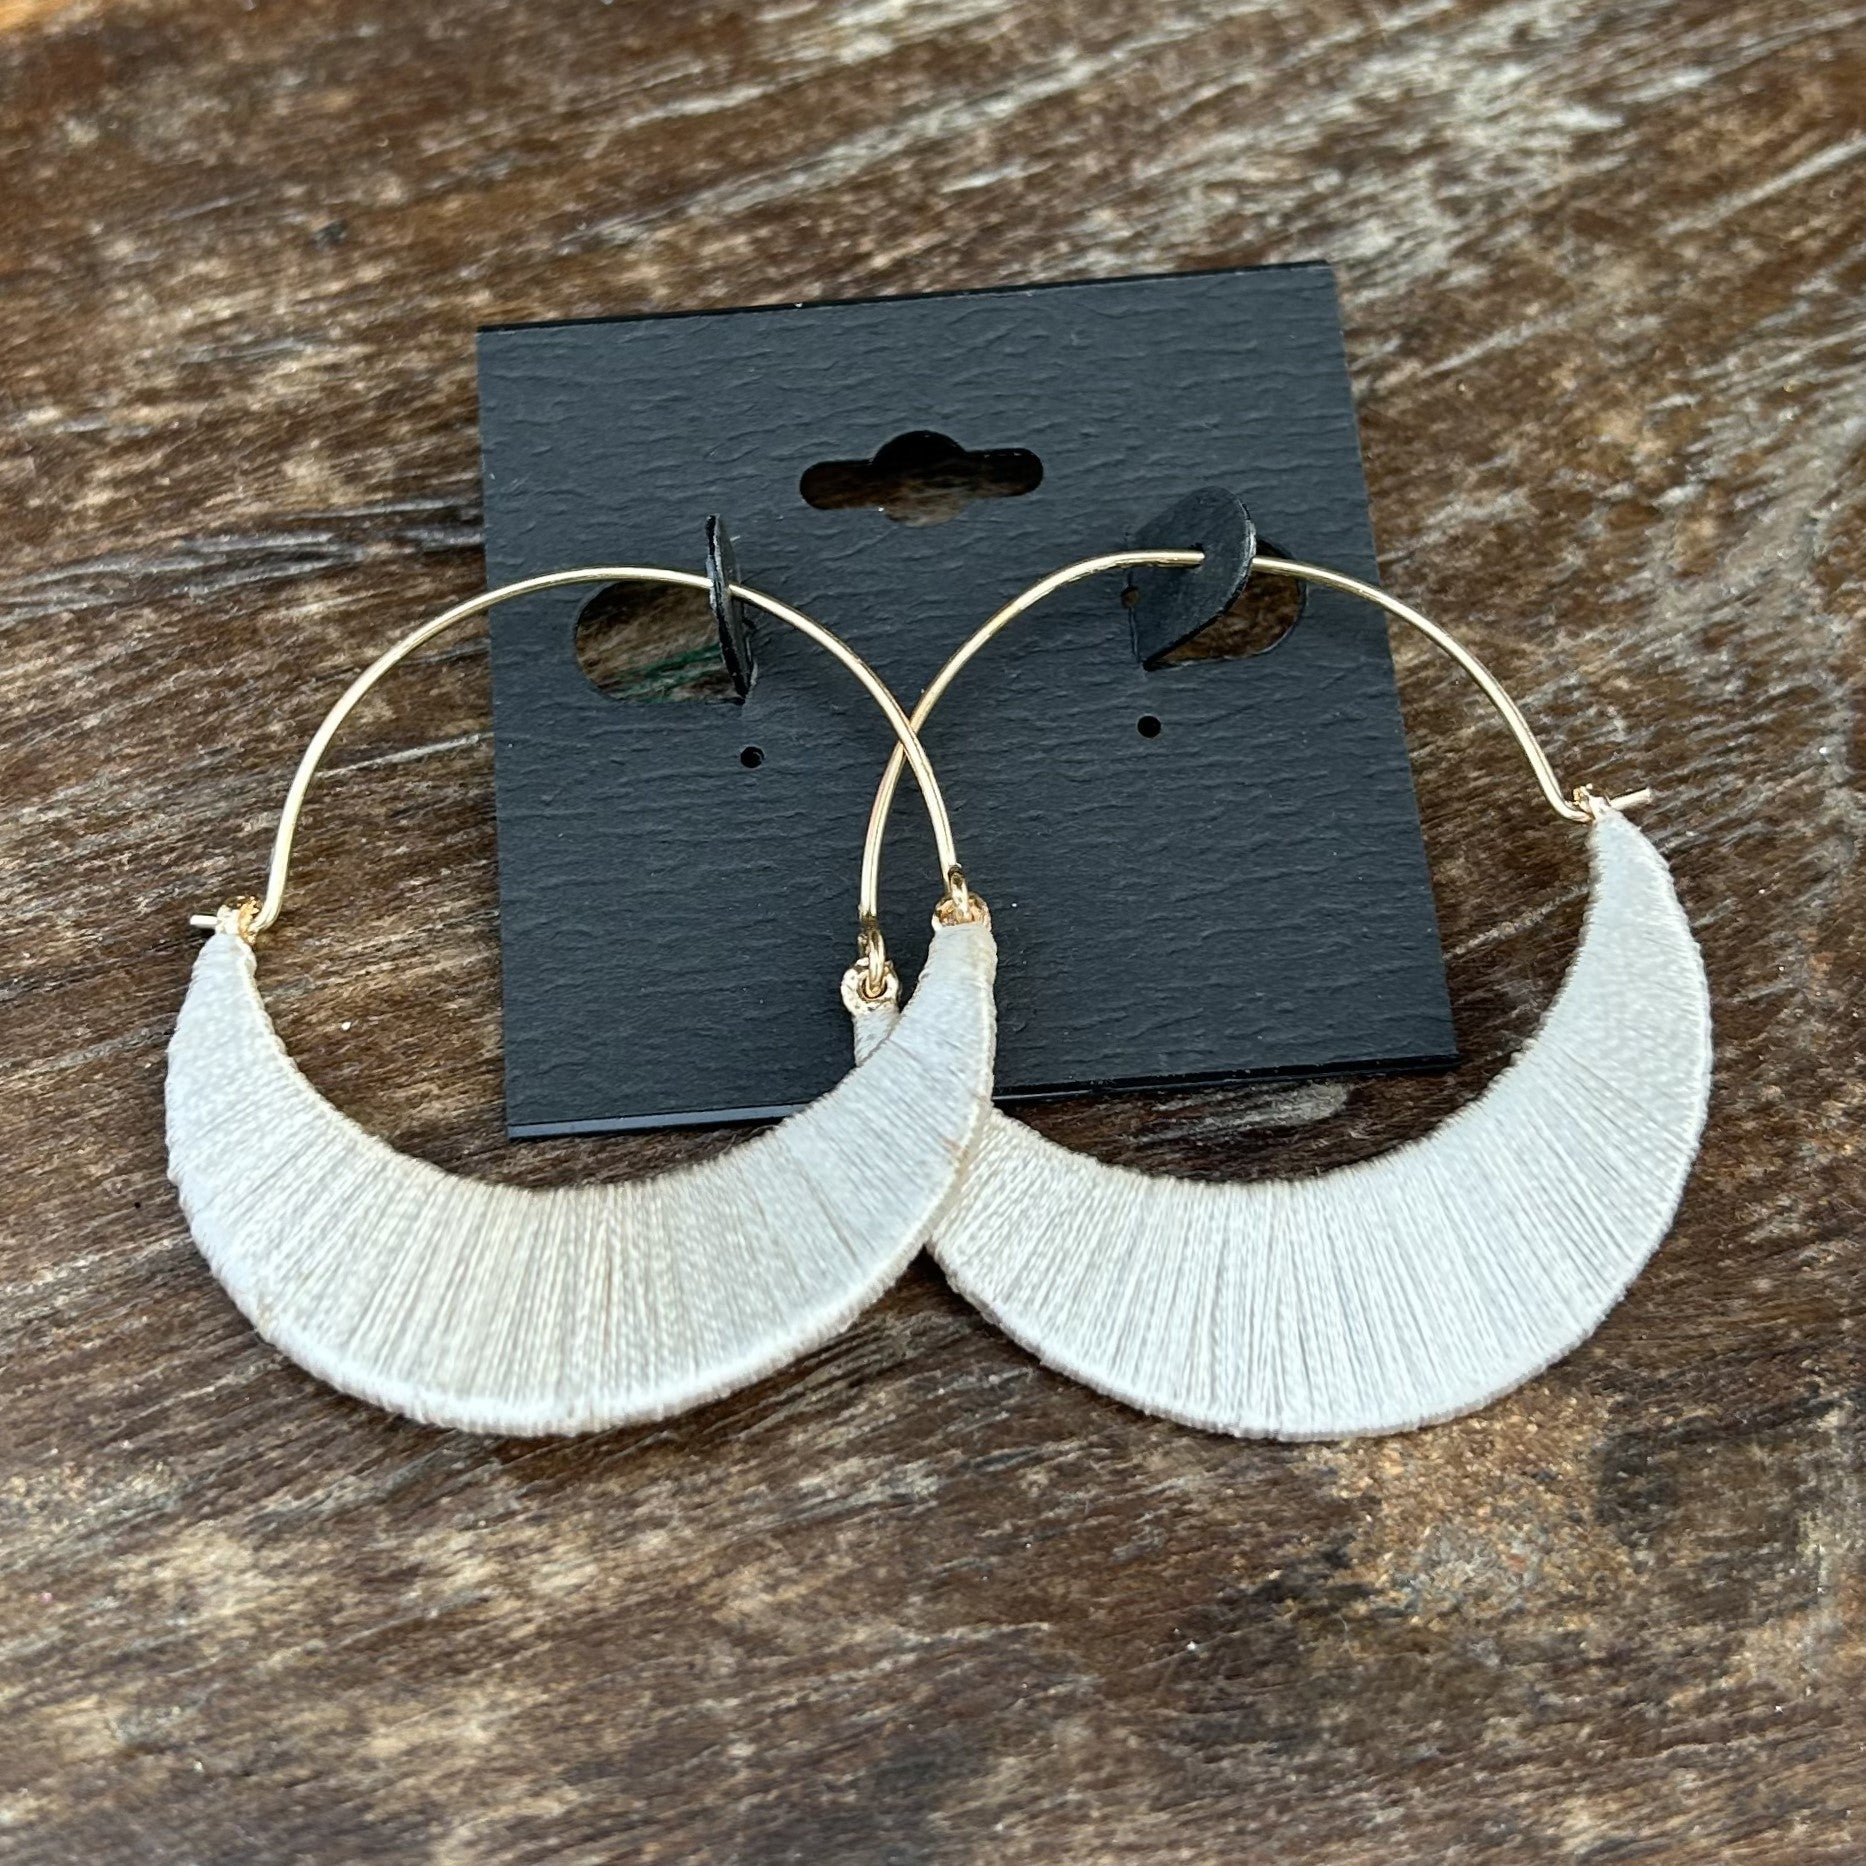 Add a touch of elegance to any outfit with our Wrapped Hoop Earrings. These delicate hoops are wrapped in silky string, creating a modern yet lovely look. What a beautiful style!